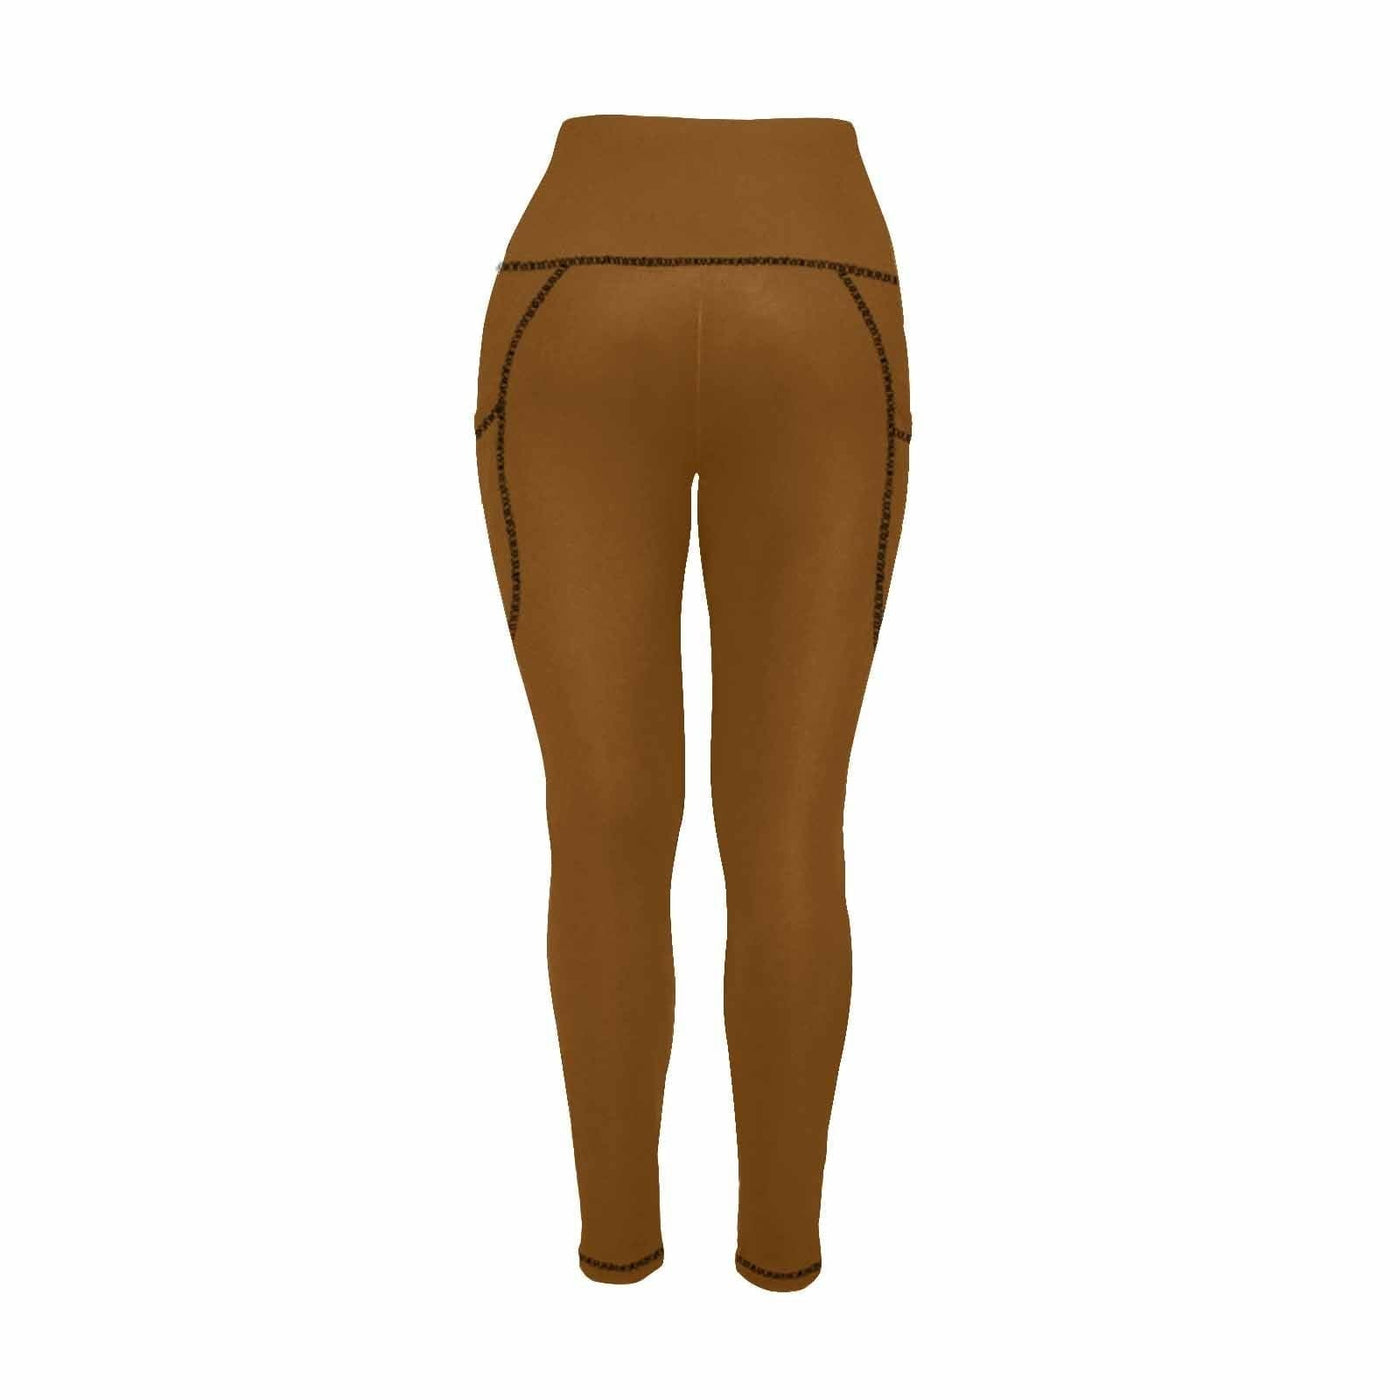 Womens Leggings With Pockets - Fitness Pants / Chocolate Brown - Womens